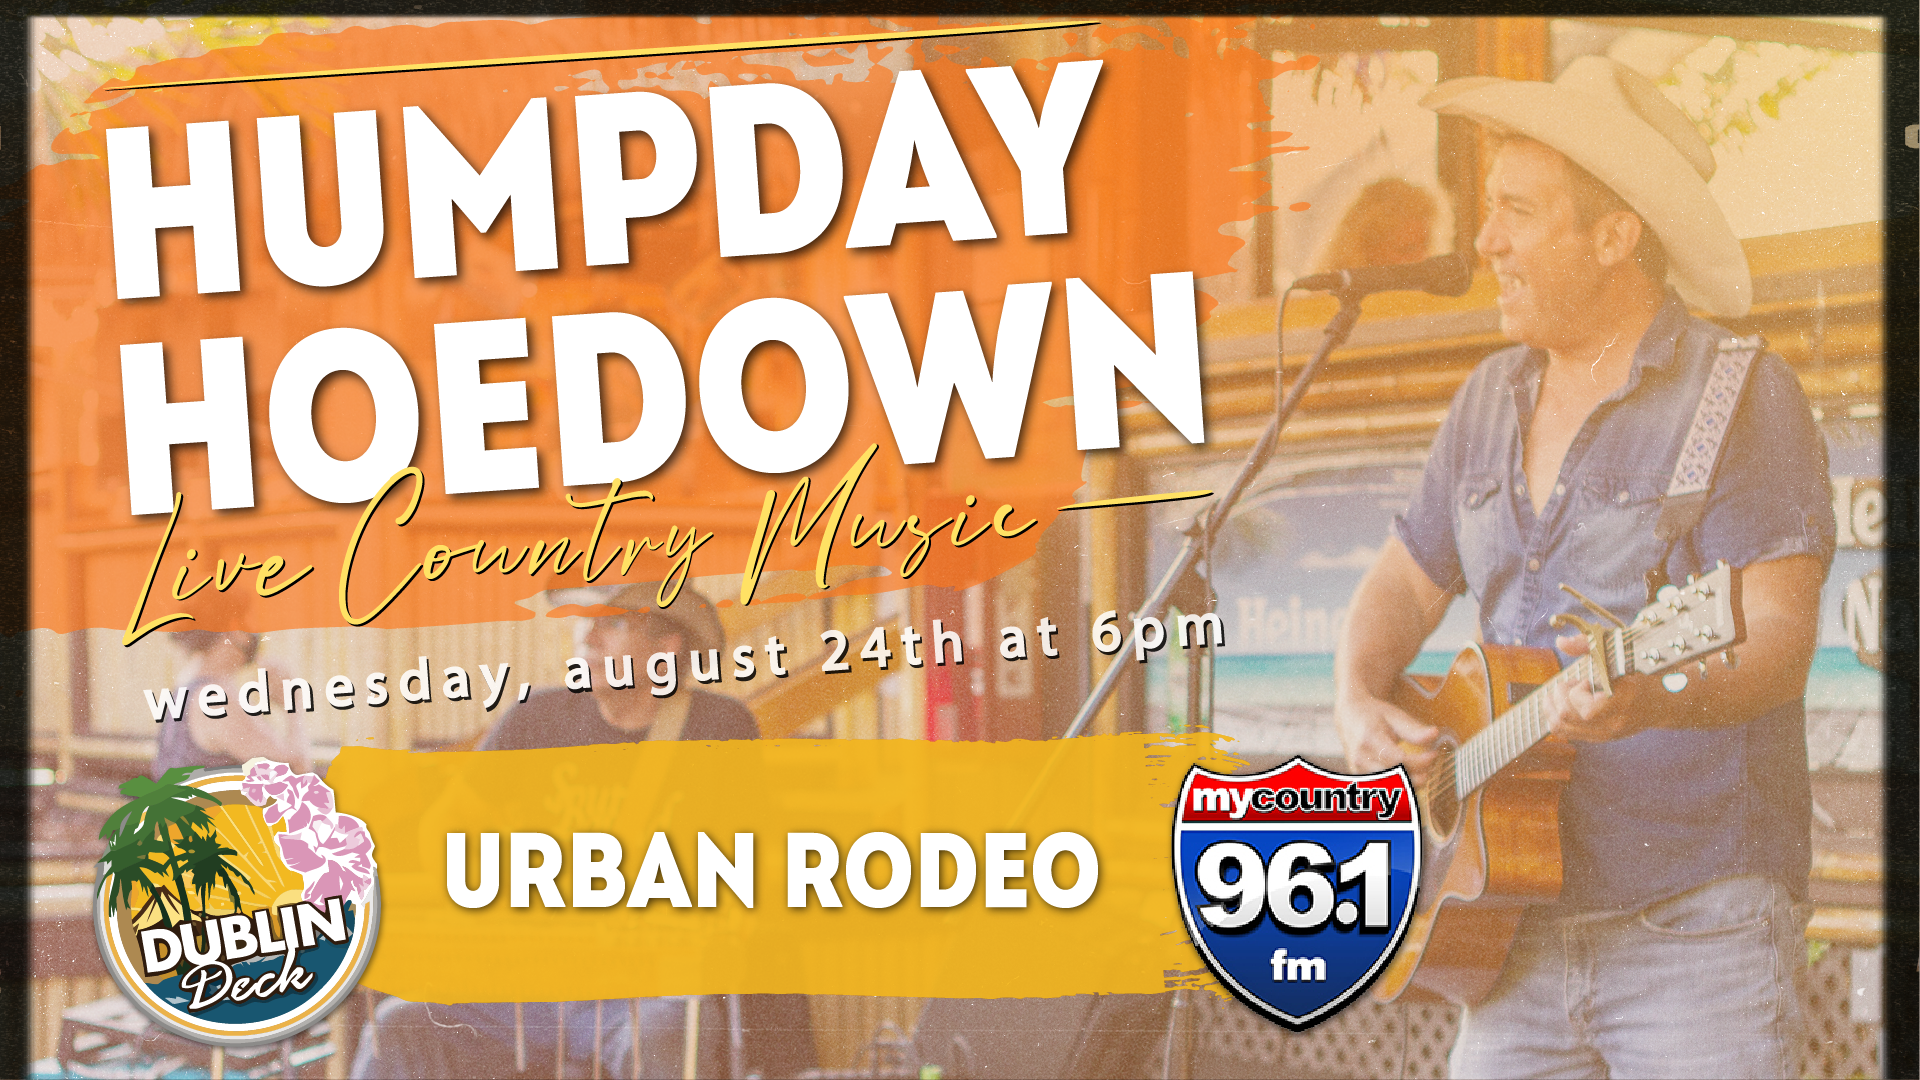 Saddle up for Humpday Hoedown with Urban Rodeo! Music begins at 6PM